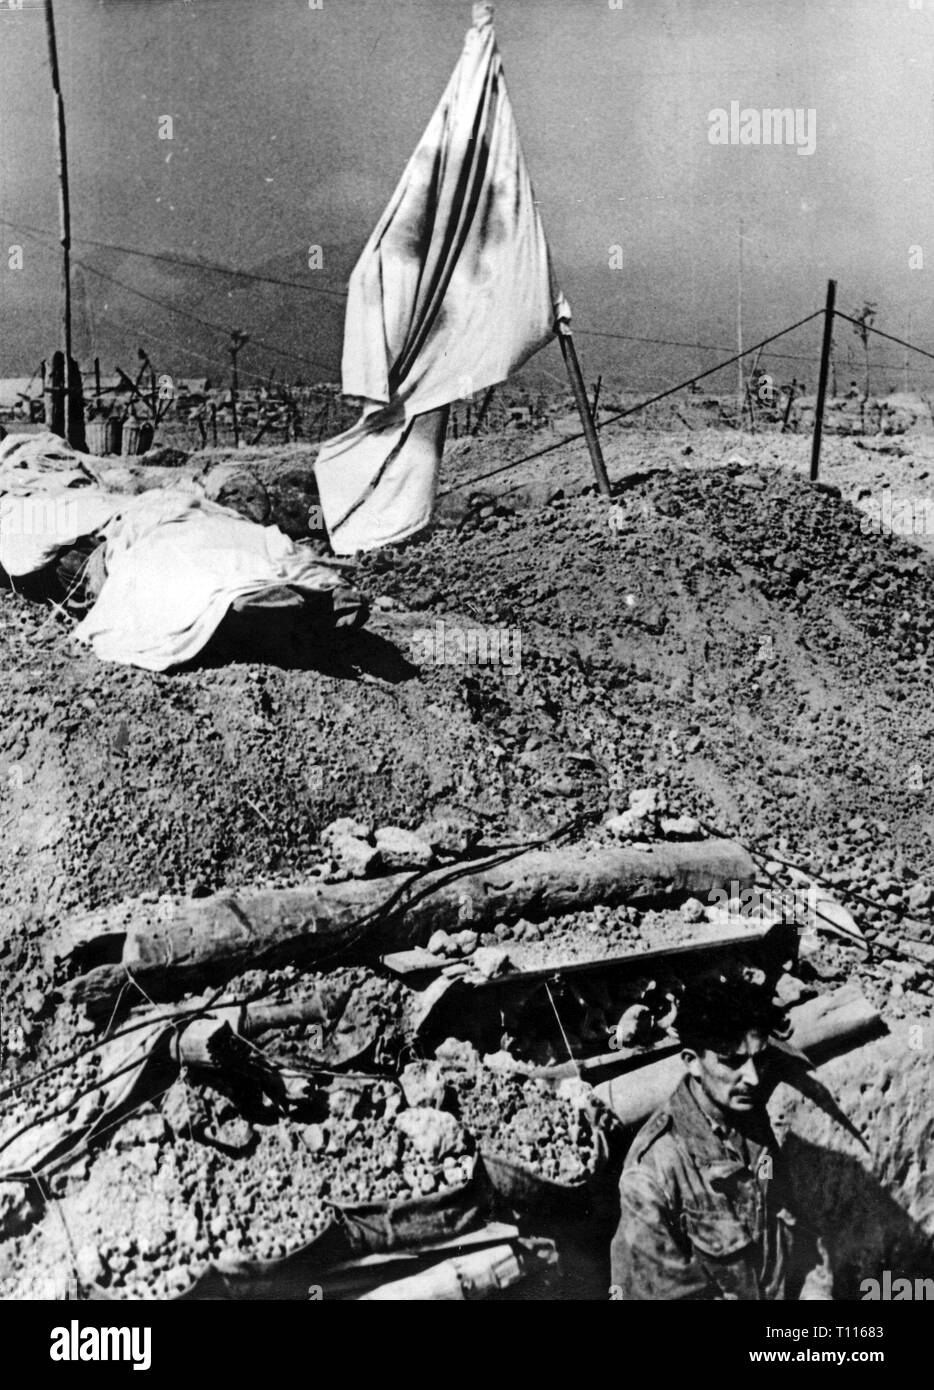 Indochina War 1946 - 1954, Battle of Dien Bien Phu, 13.3. - 7.5.1954, flag of the red cross on the shelter of a field hospital, 26.3.1954, sick bay, sick bays, medical corps organisation, health care, healthcare, dugout, dugouts, Viet Nam, North Vietnam, wars, French Indochina, Indochina, French colony, colonial war, military, army, armies, paratroop, paratroops, paratrooper, Para, paratroopers, Paras, airborne forces, people, France, 20th century, 1950s, battle, battles, flag, flags, cross, crosses, shelter, shelters, combat support hospital, co, Additional-Rights-Clearance-Info-Not-Available Stock Photo